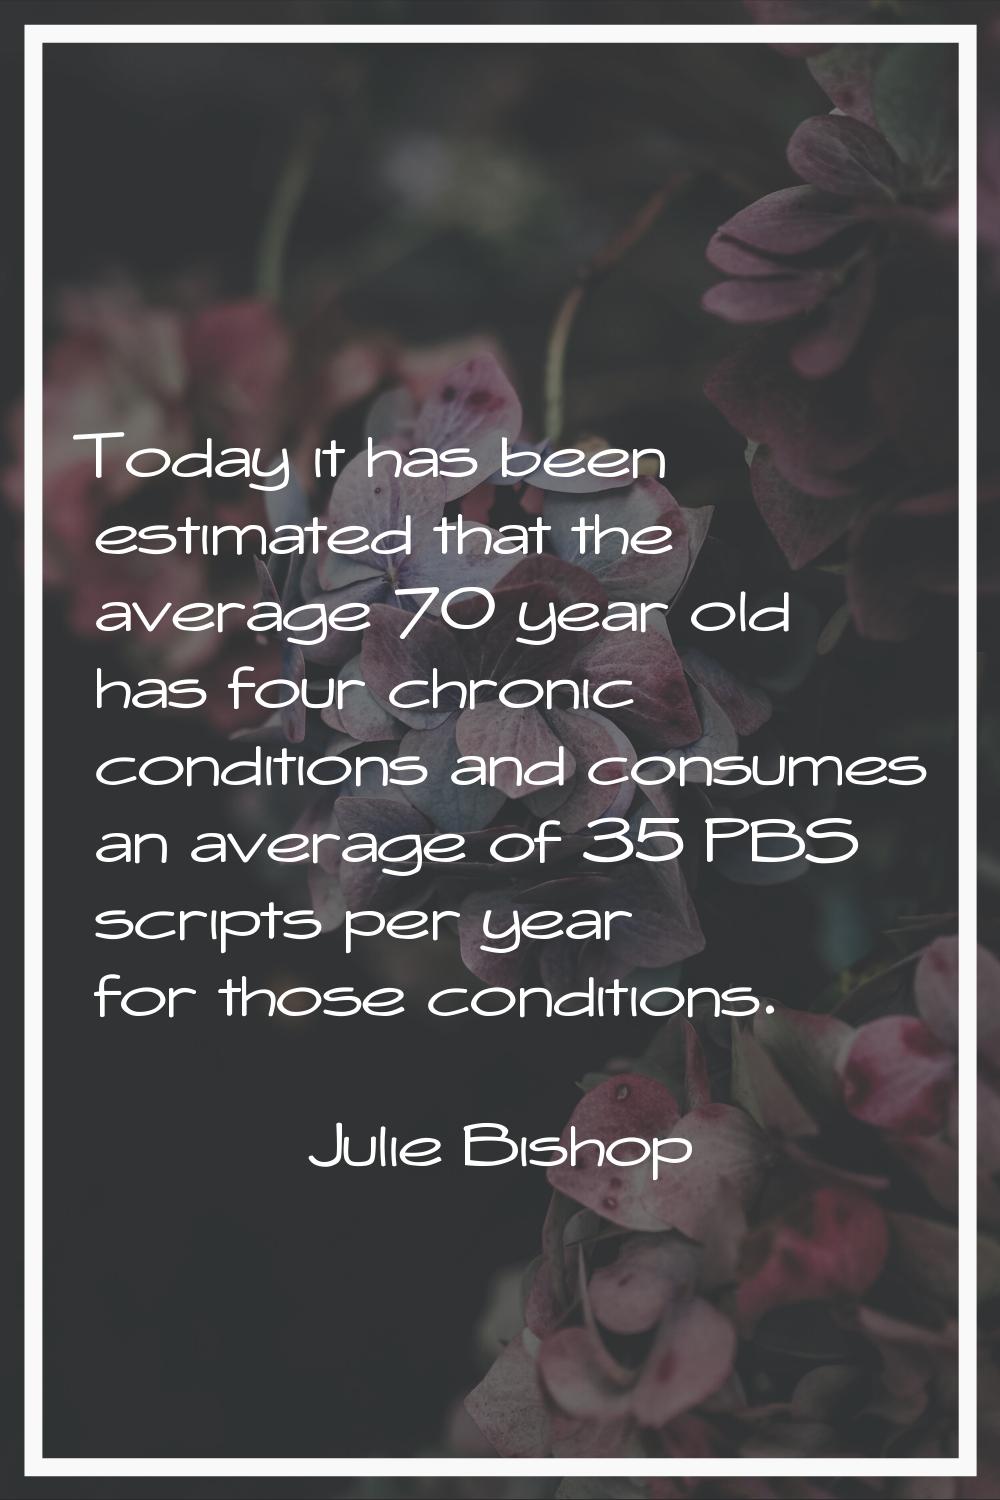 Today it has been estimated that the average 70 year old has four chronic conditions and consumes a